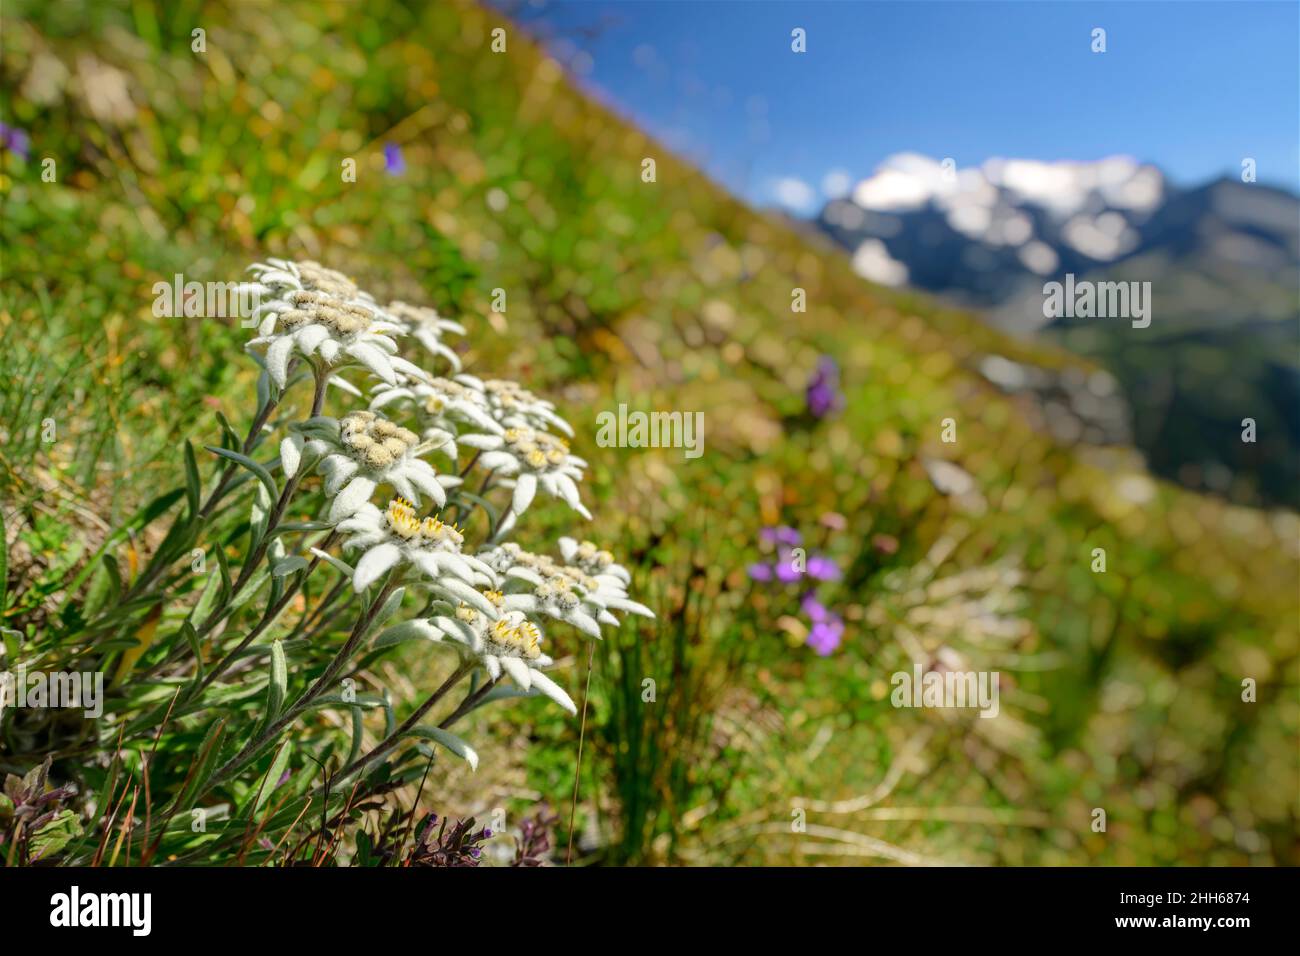 Edelweiss white flowers in field on sunny day, Vanoise National Park, France Stock Photo